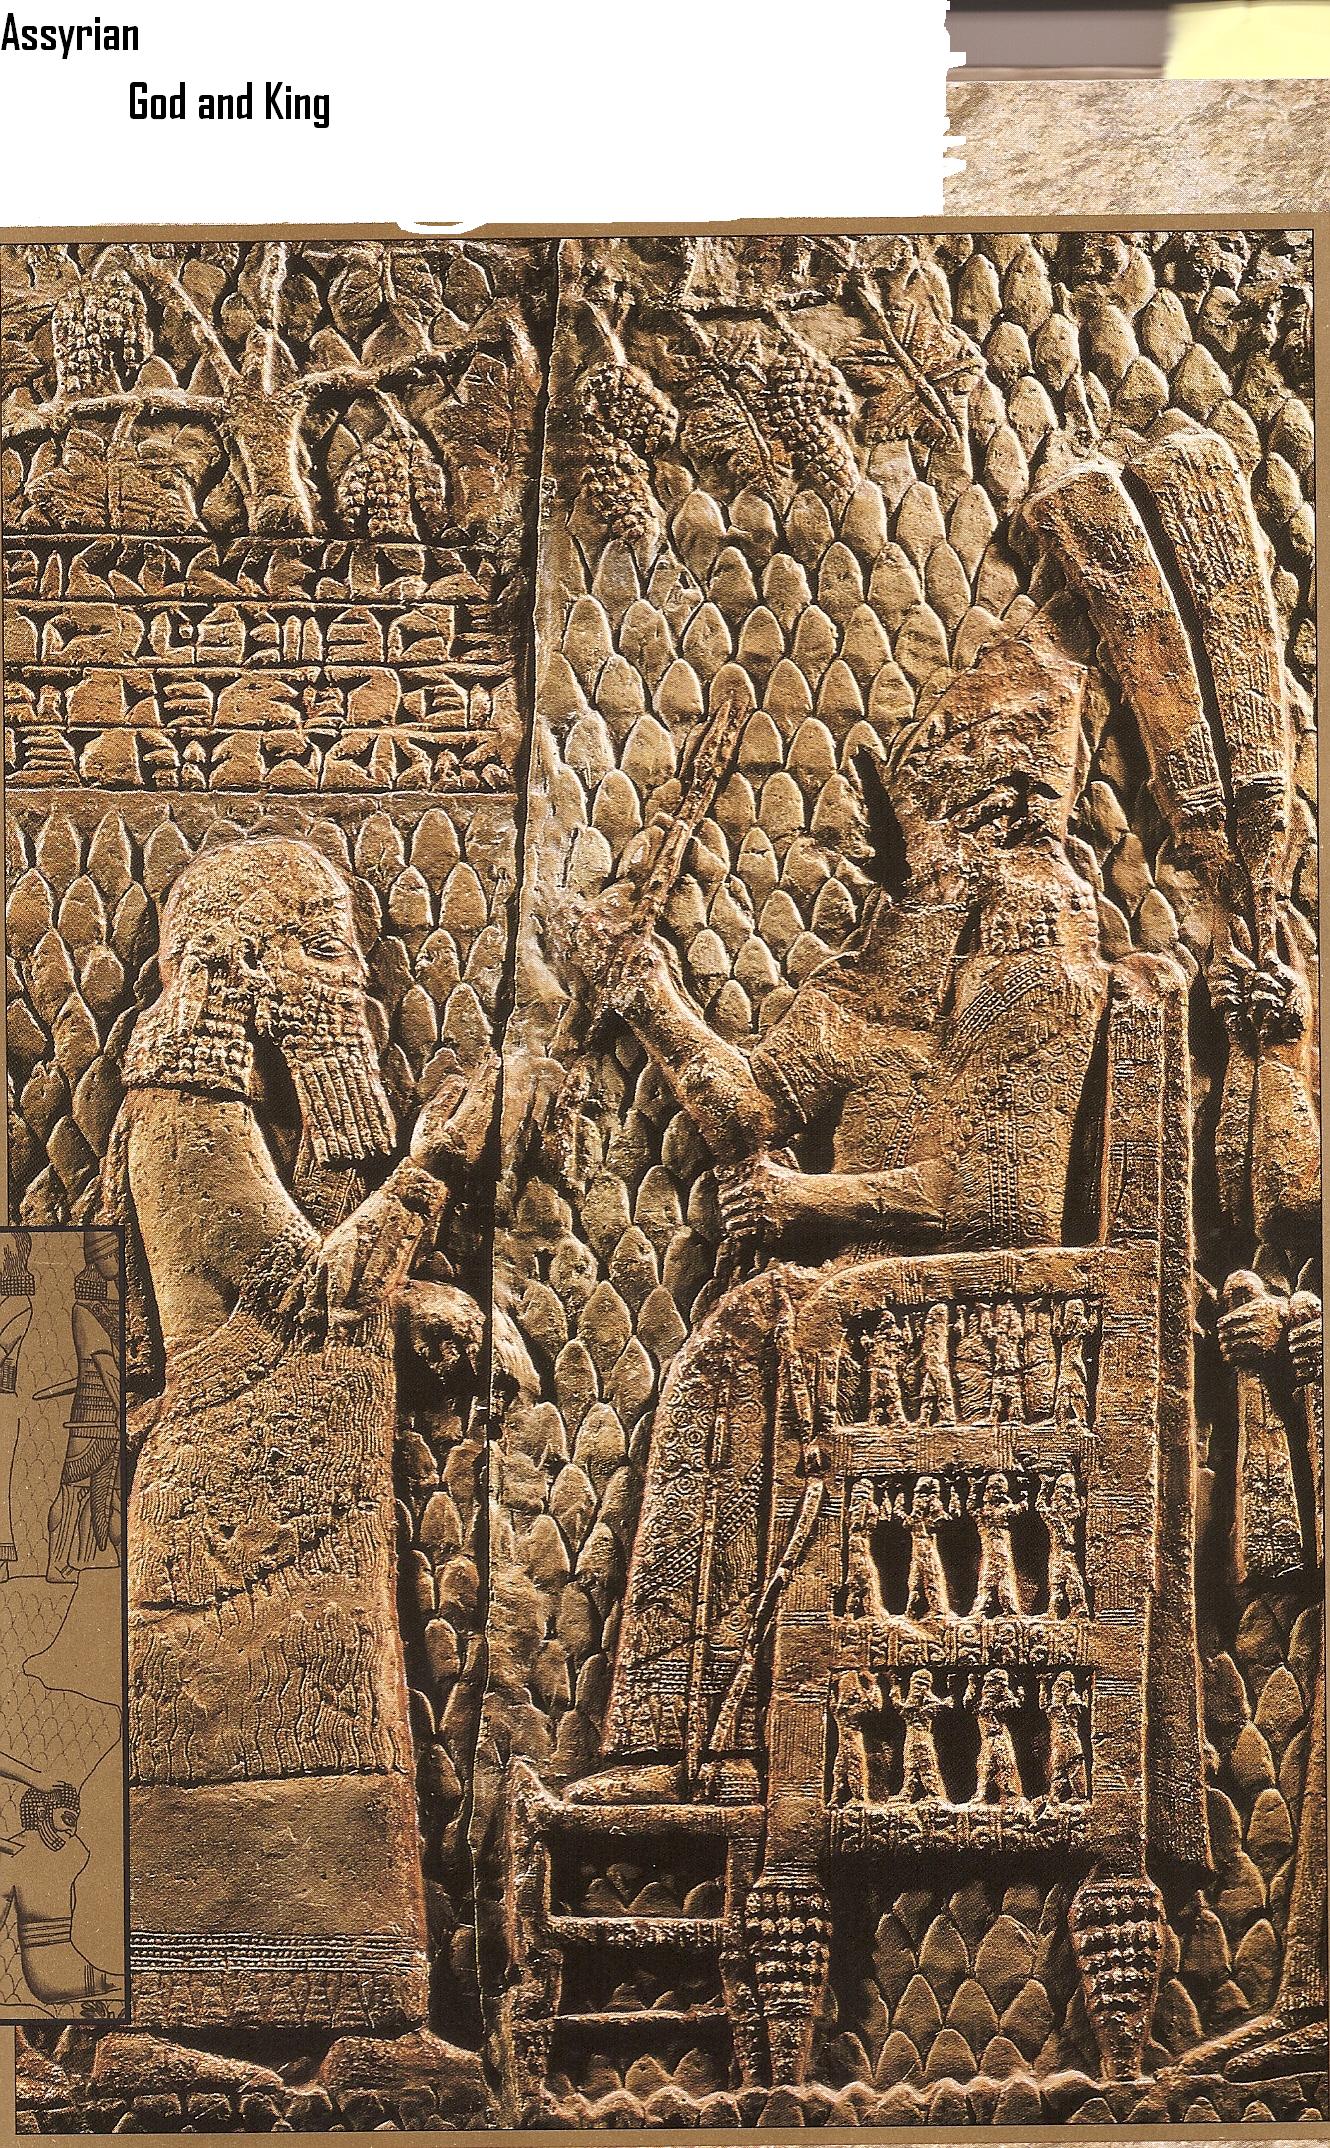 4a - Assyrian artifact of giant alien god Ashur seated, with an unidentified giant mixed-breed king standing before him, waiting for Ashur's instructions, ancient artefacts tell a clear story of earthling involvement with giant aliens, who gave laws, religion, agriculture, astronomy, education, medical science, & everything else to mankind, today the list would be electricity, silicon chips, night vision, space technology, kevlar, nuclear technology, & everything else mankind has come to learn from the gods